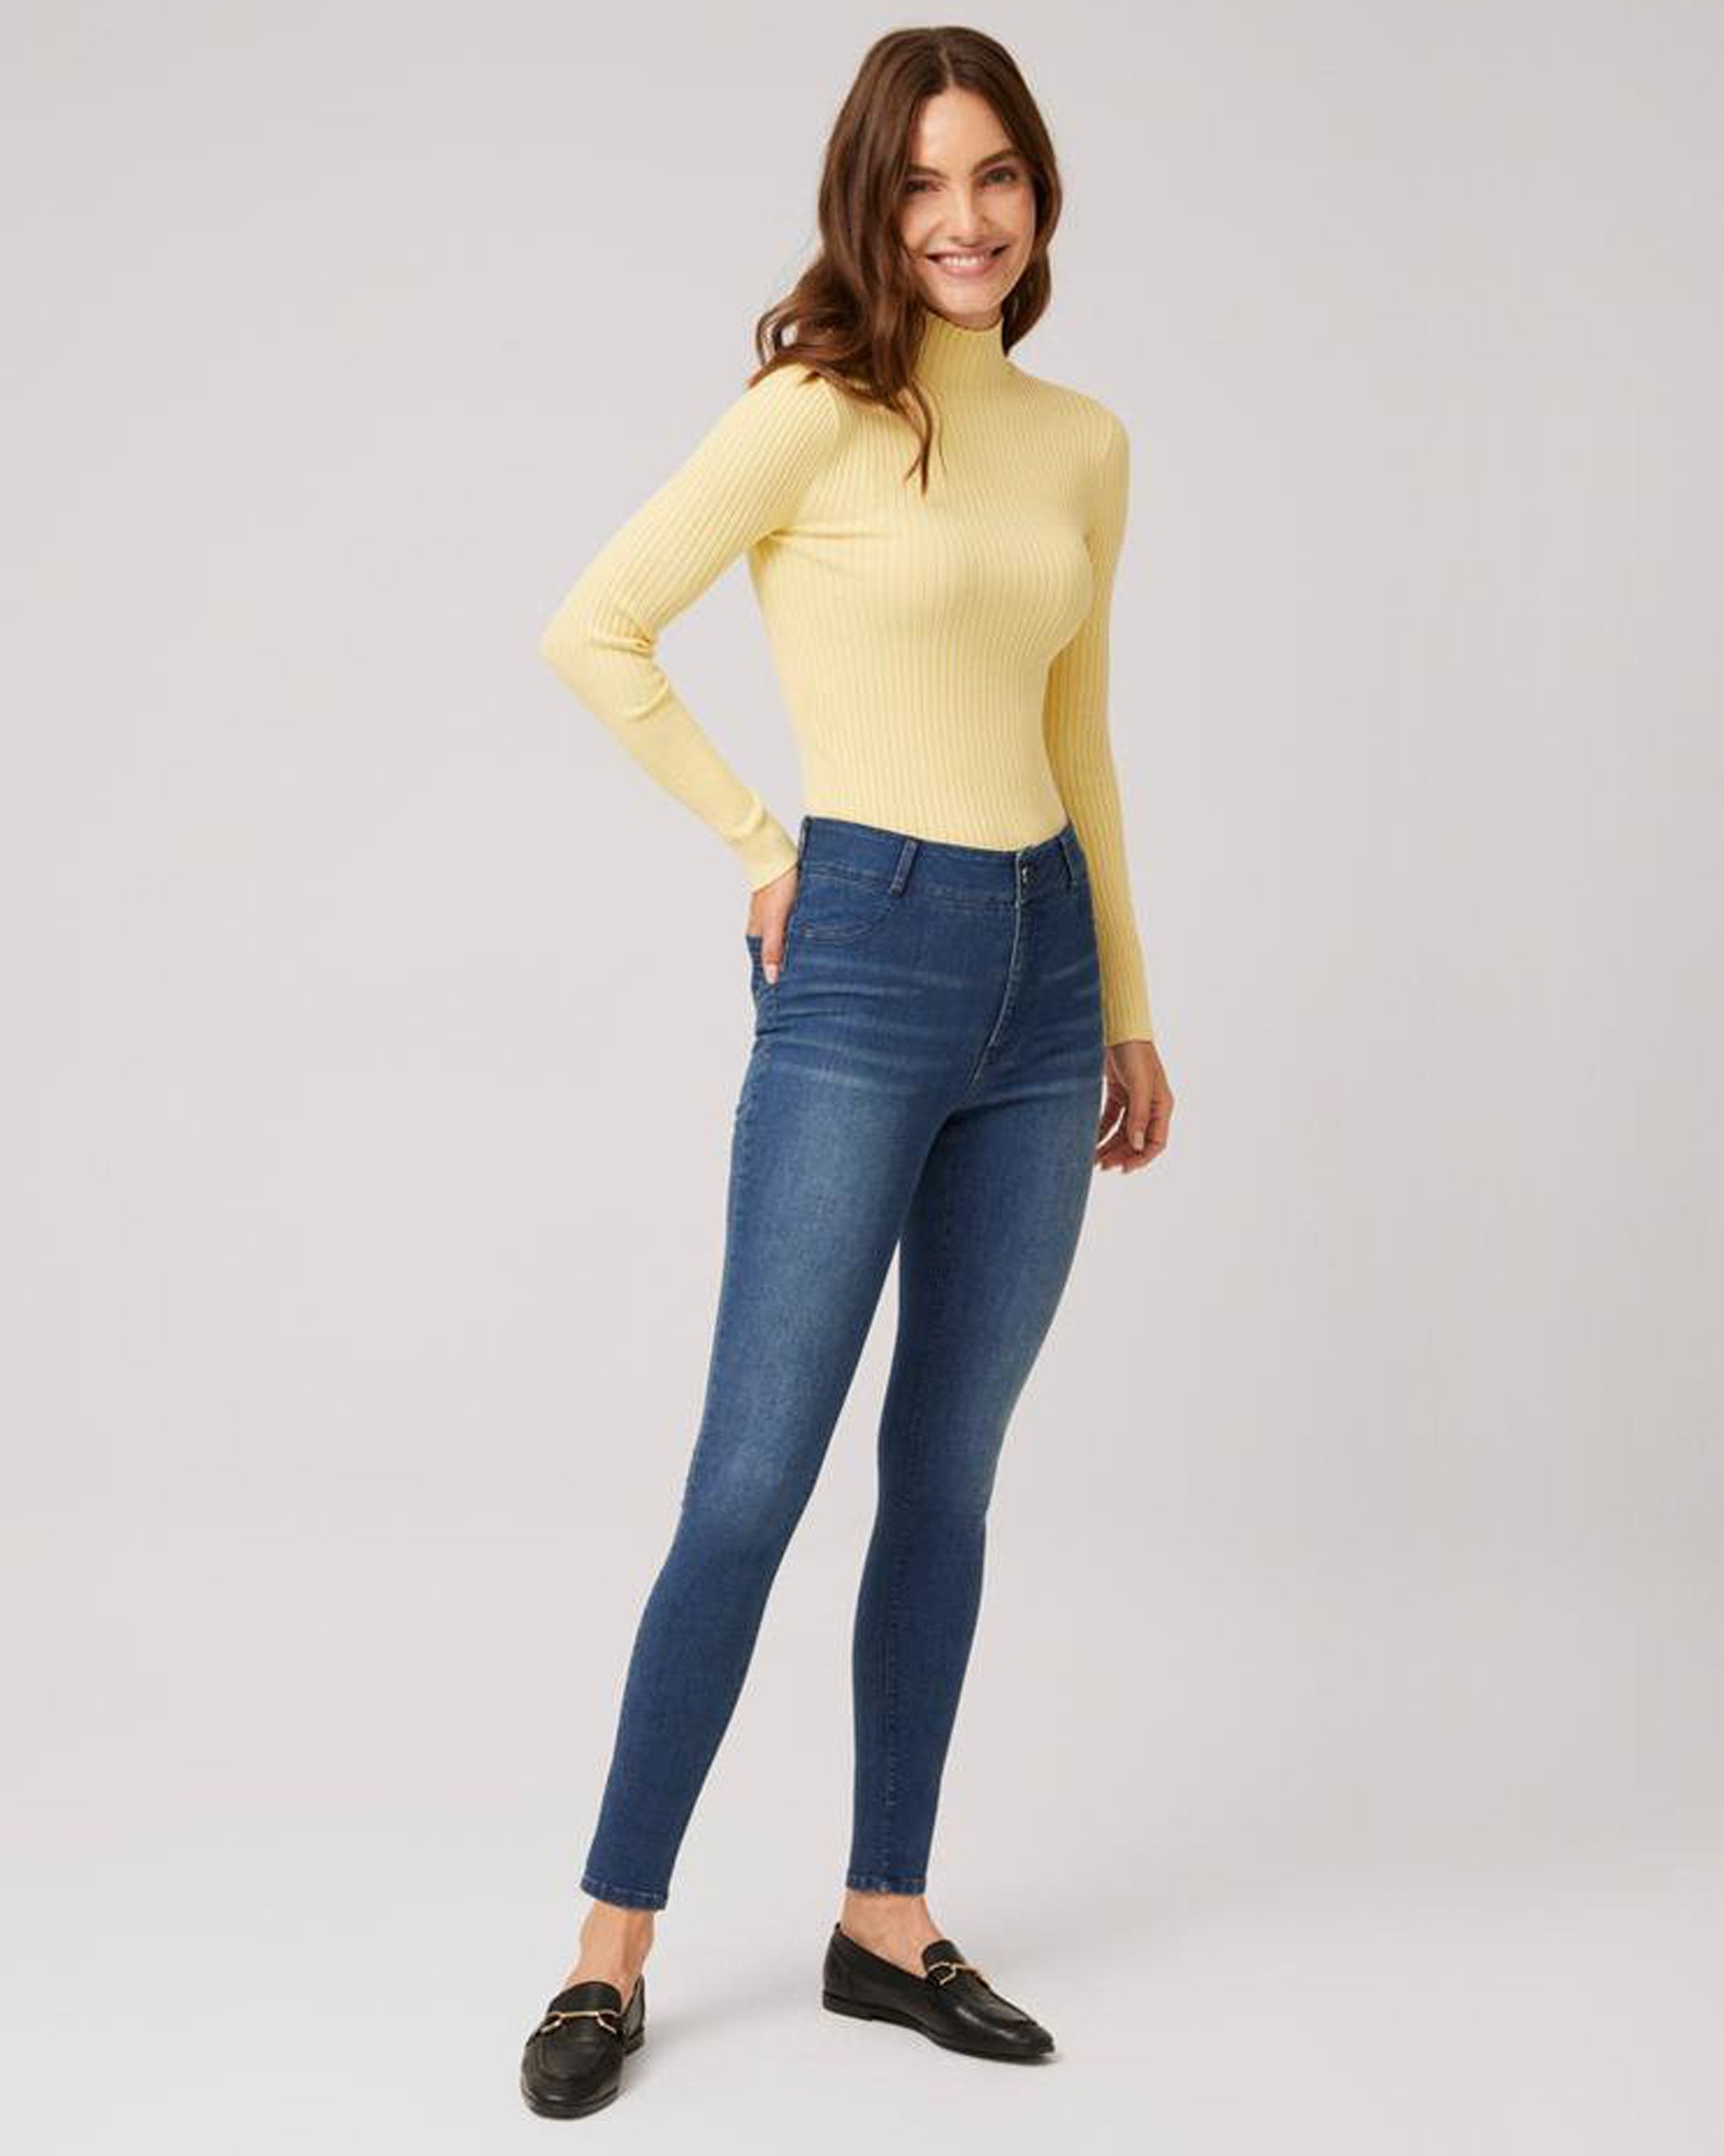 Ysabel Mora 70407 Denim Jeggings - Dark denim stretch jean leggings with faded worn effect, back pockets, belt loops, button and fly zip closures faux front pockets and fly top stitching.